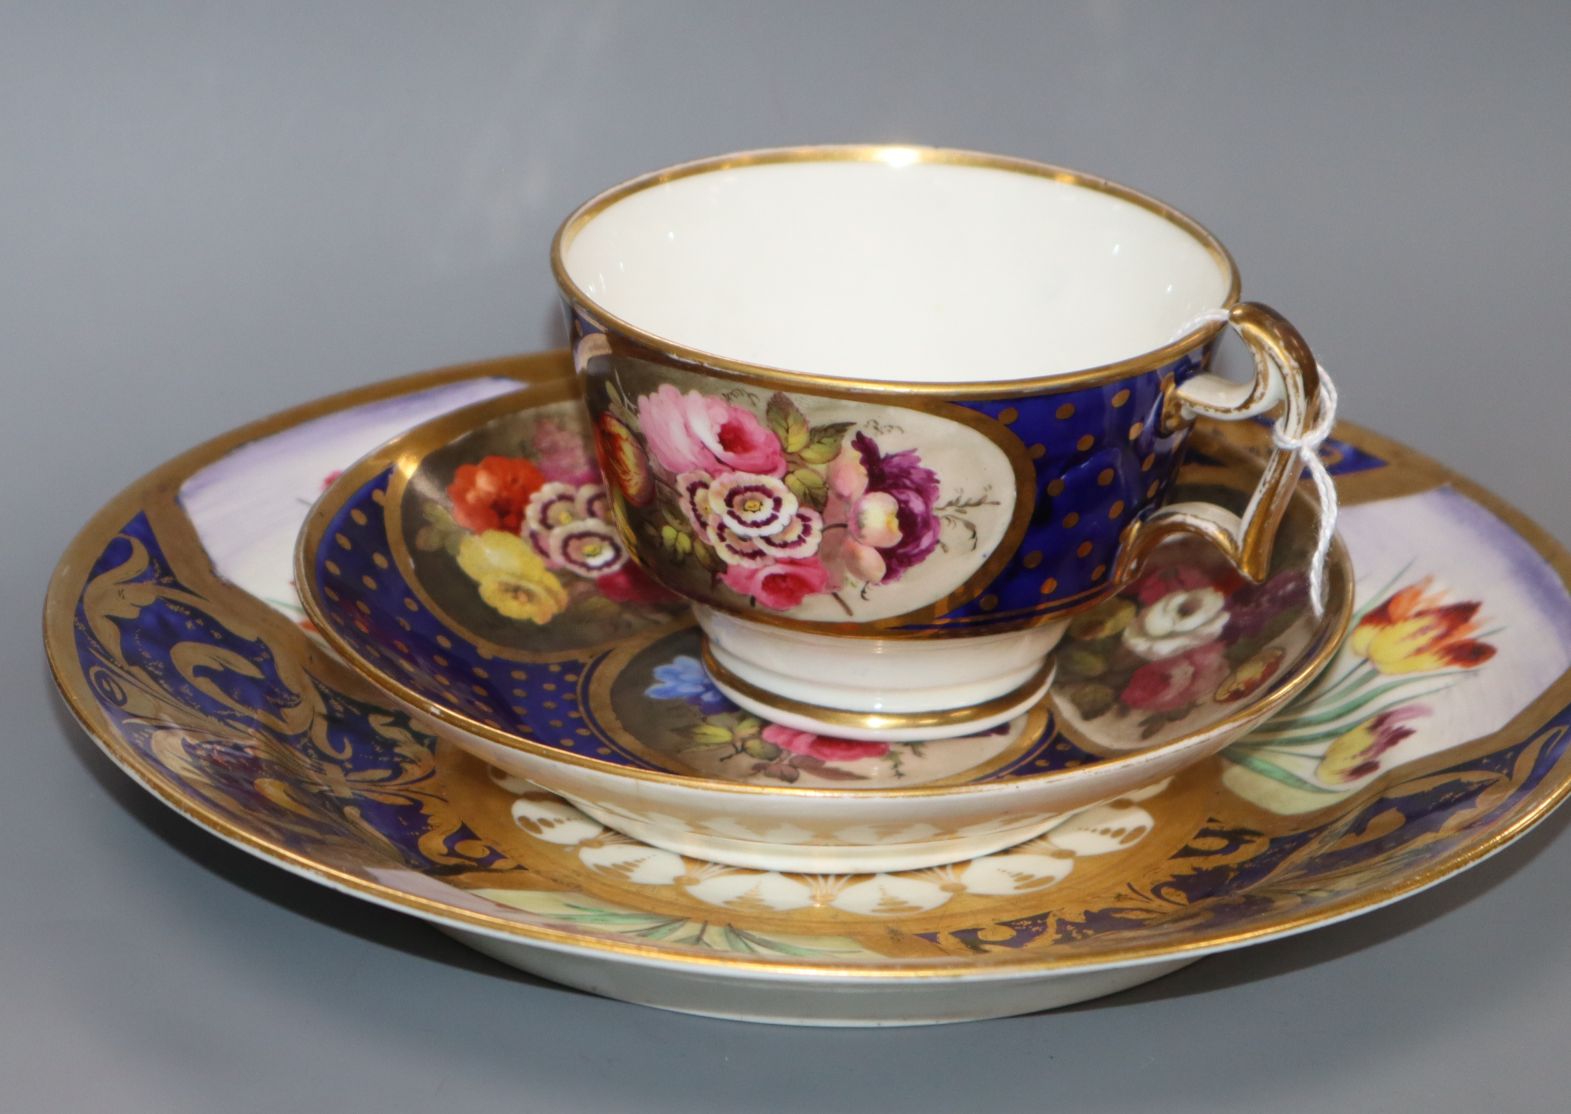 An early 19th century Swansea porcelain tea cup, saucer and plate, c.1820